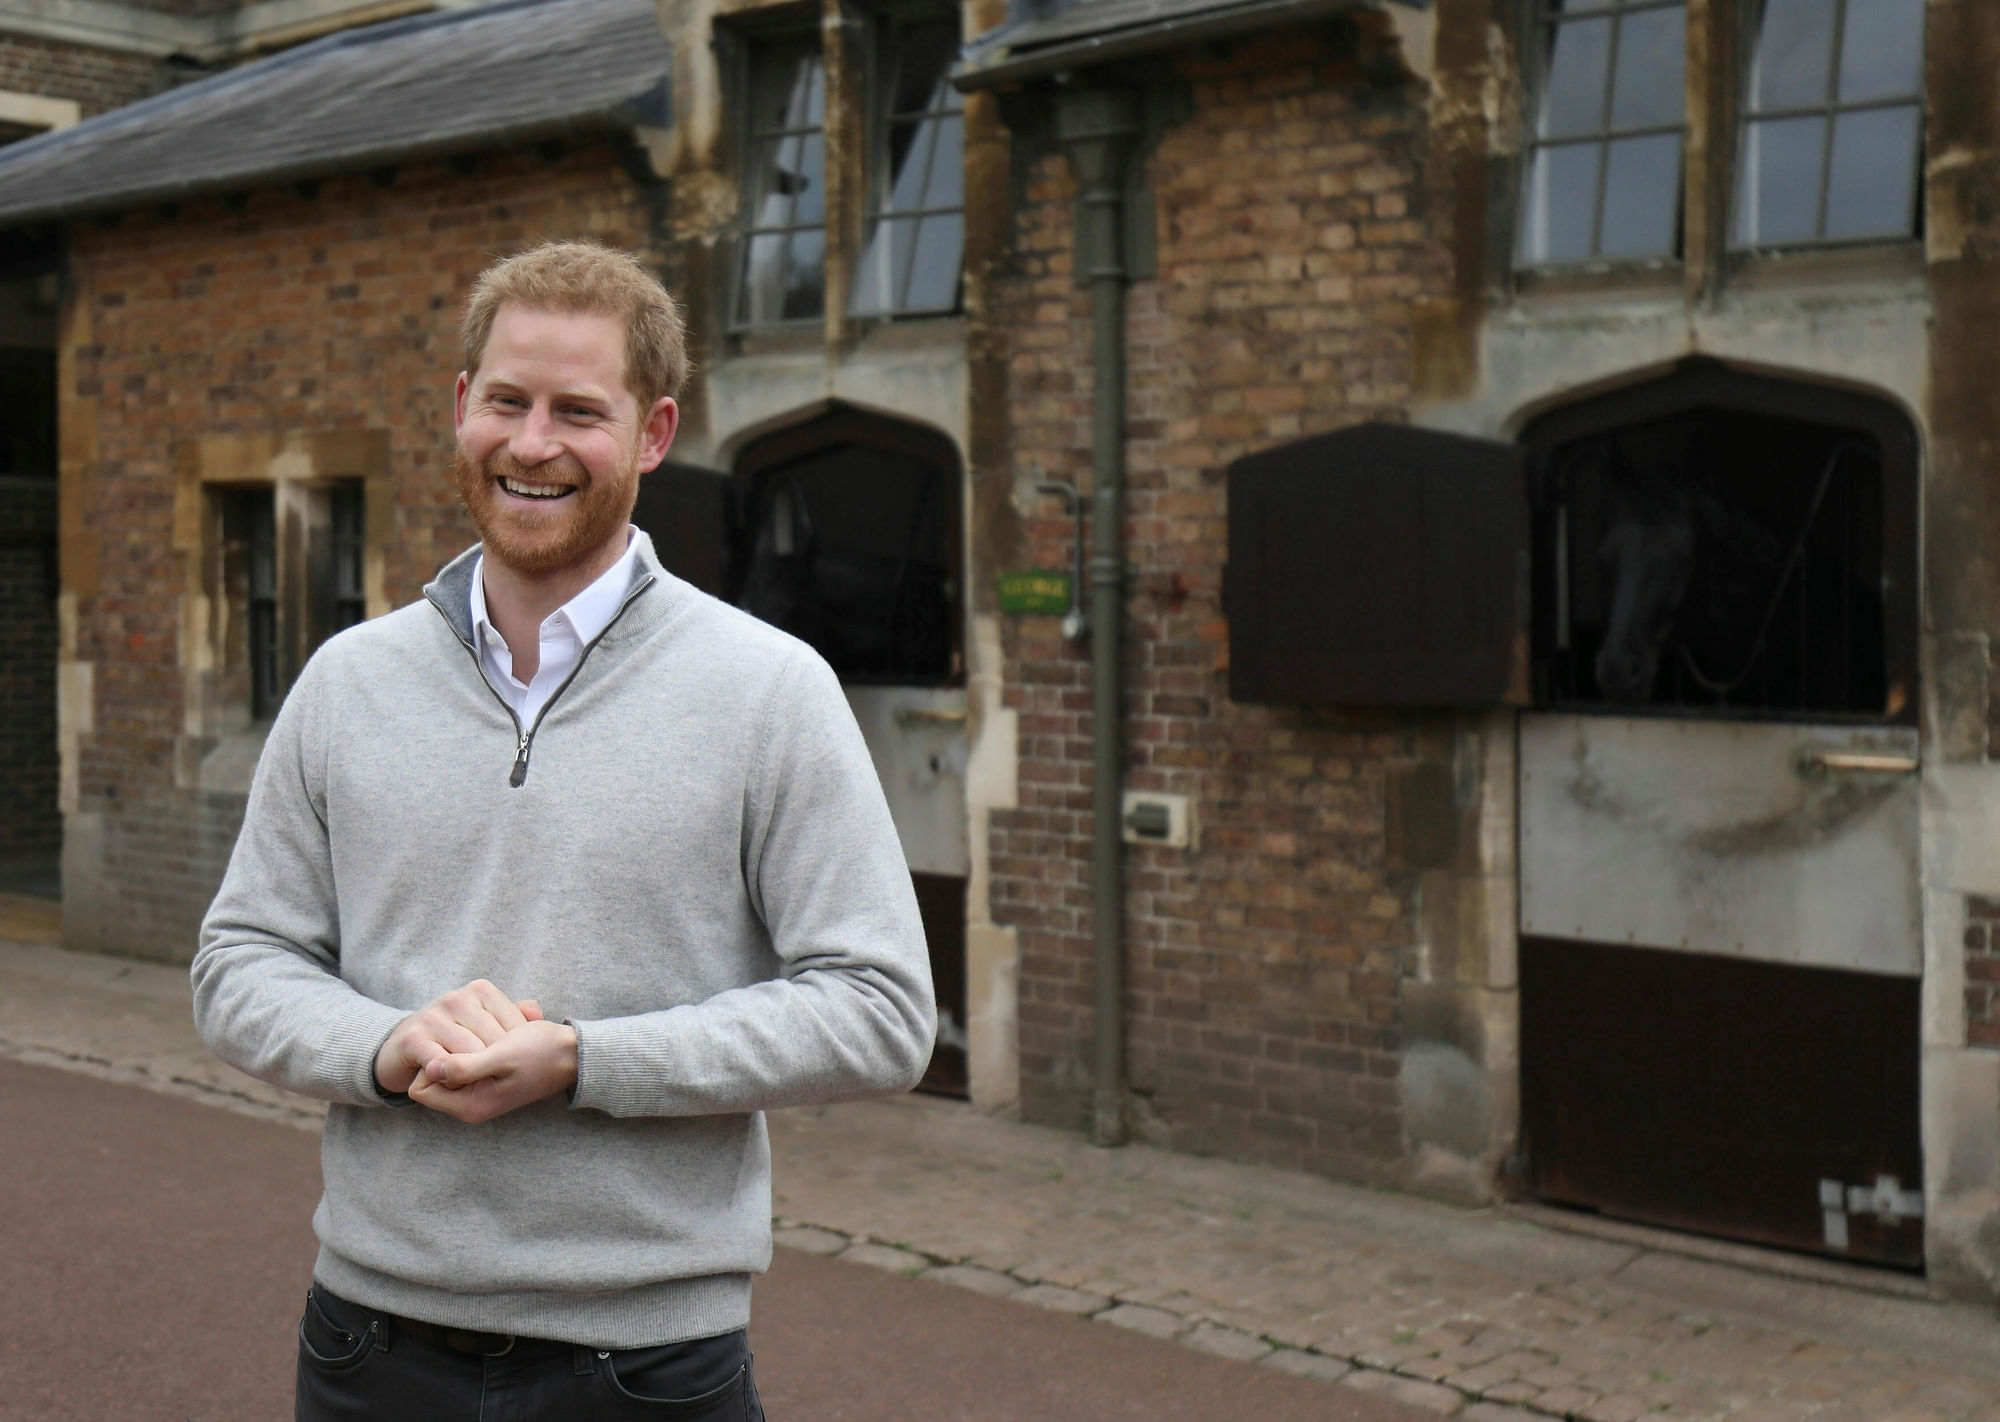 The Duke of Sussex, Prince Harry, at an event in Scotland on Wednesday, 26 February, said the formality no longer was necessary.